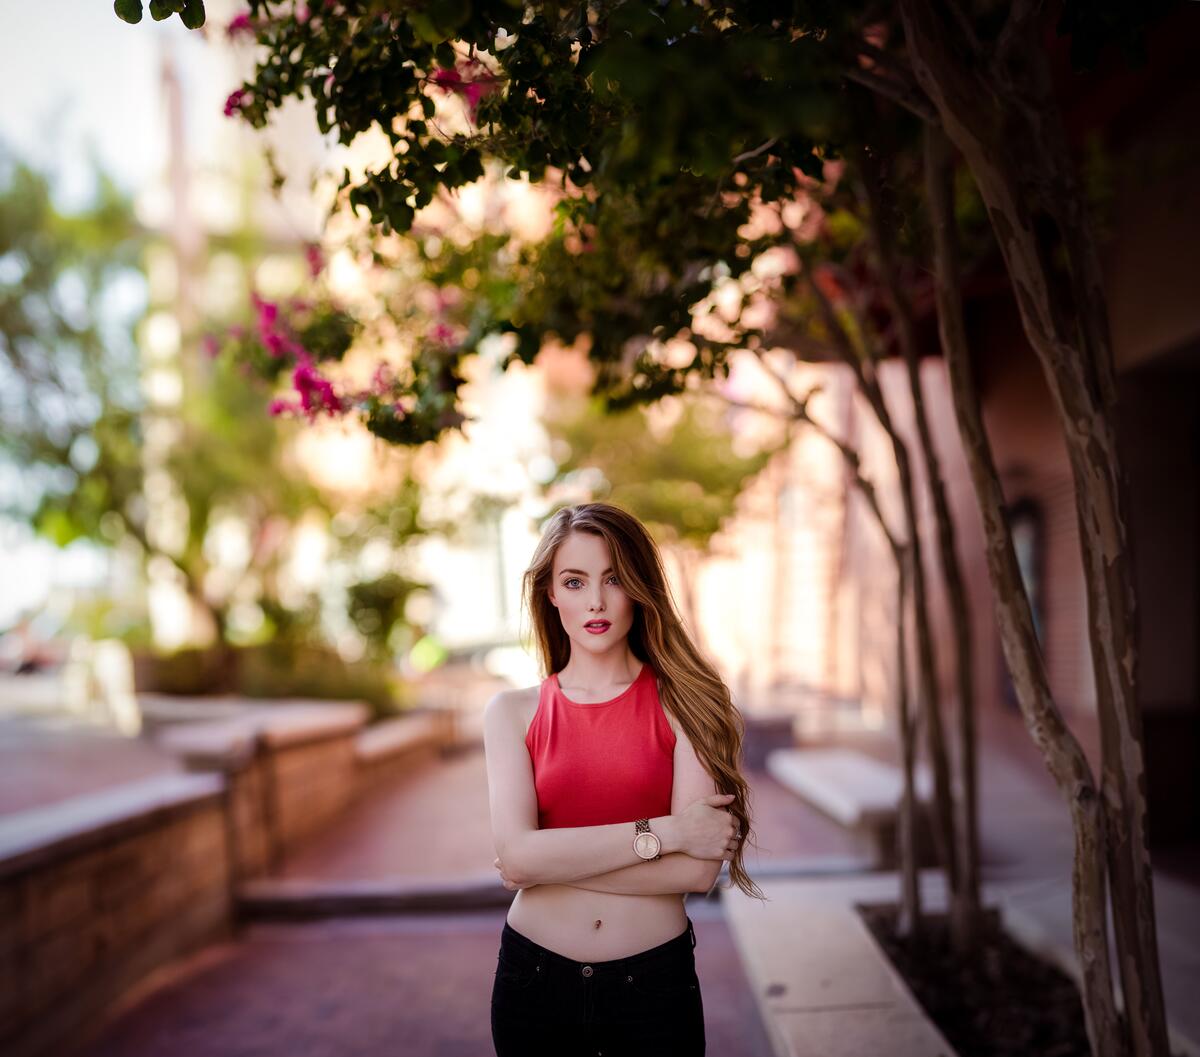 Portrait of April Alleys in a red top